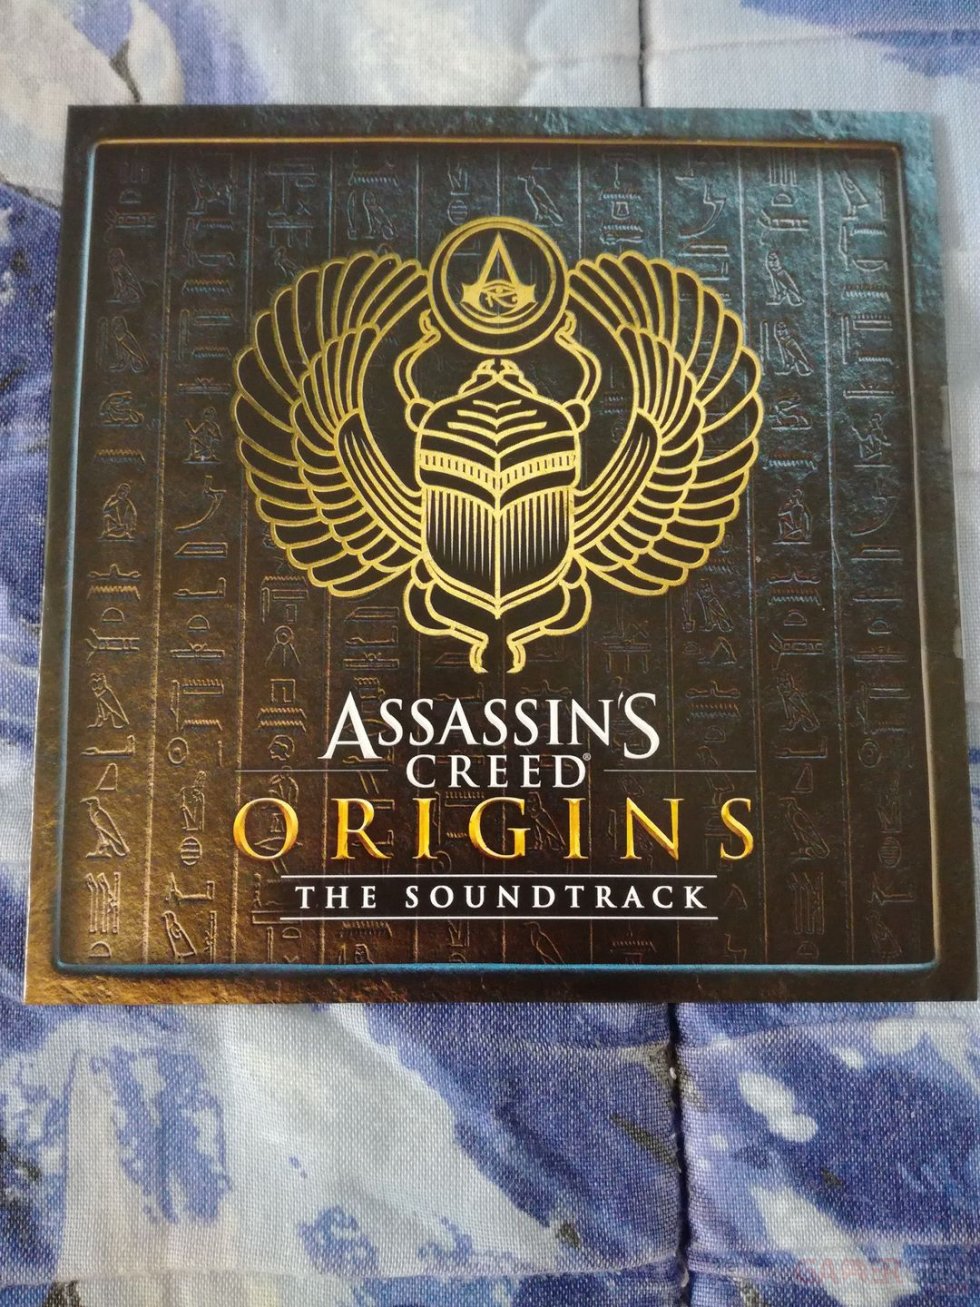 Assassin-Creed-Origins-collector-Dawn-of-the-Creed-unboxing-déballage-12-31-10-2017